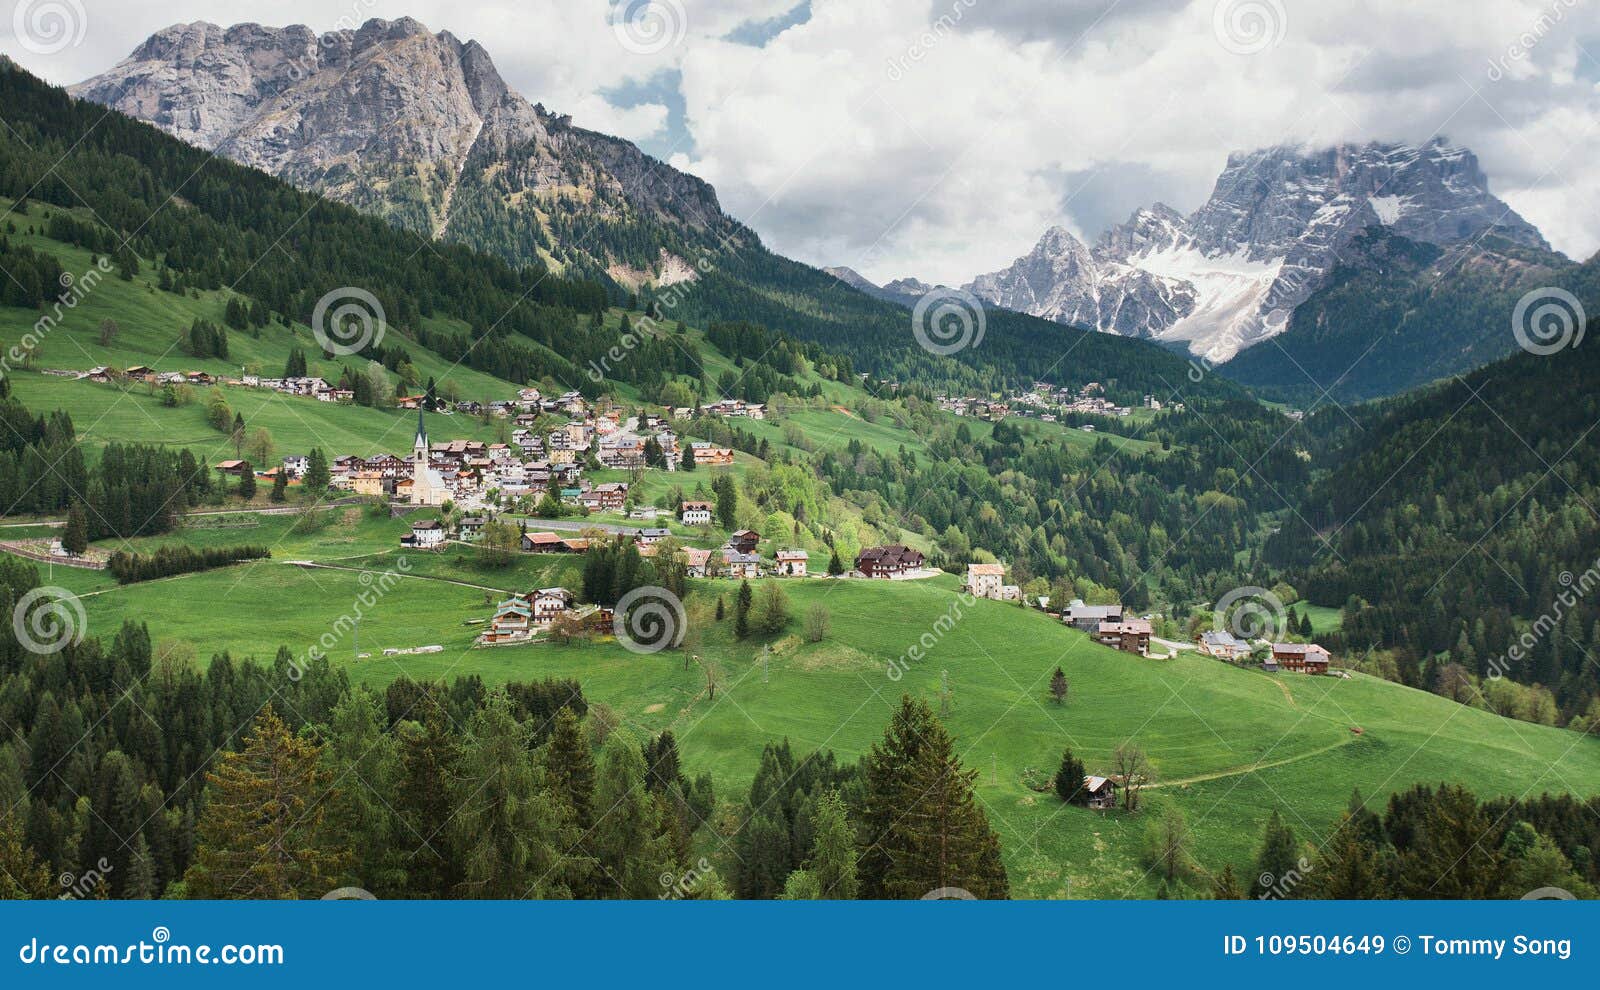 Picturesque Village In The Italian Alps Stock Image Image Of Valley